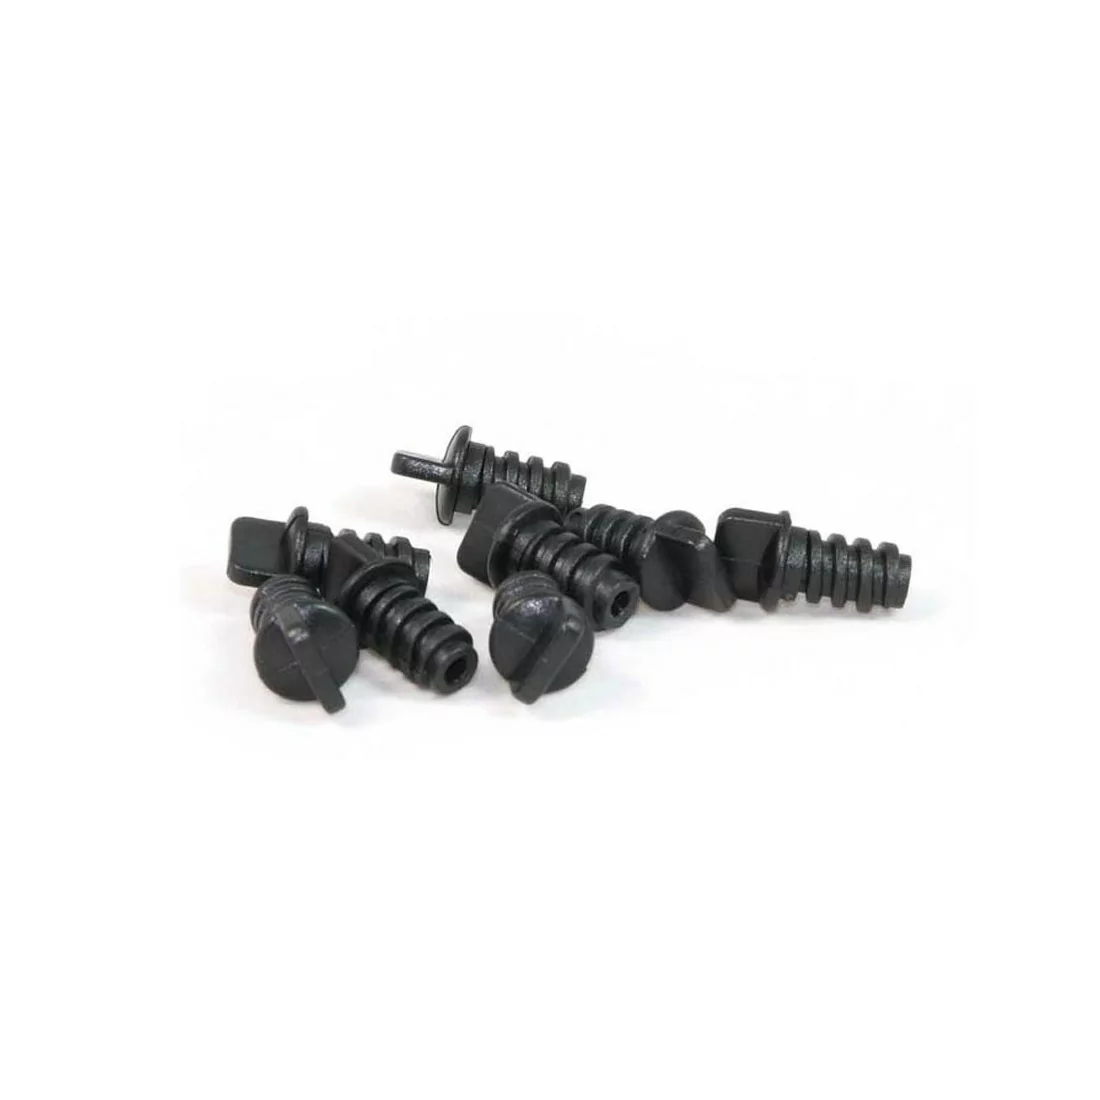 Max 130D plastic screw for neons protections